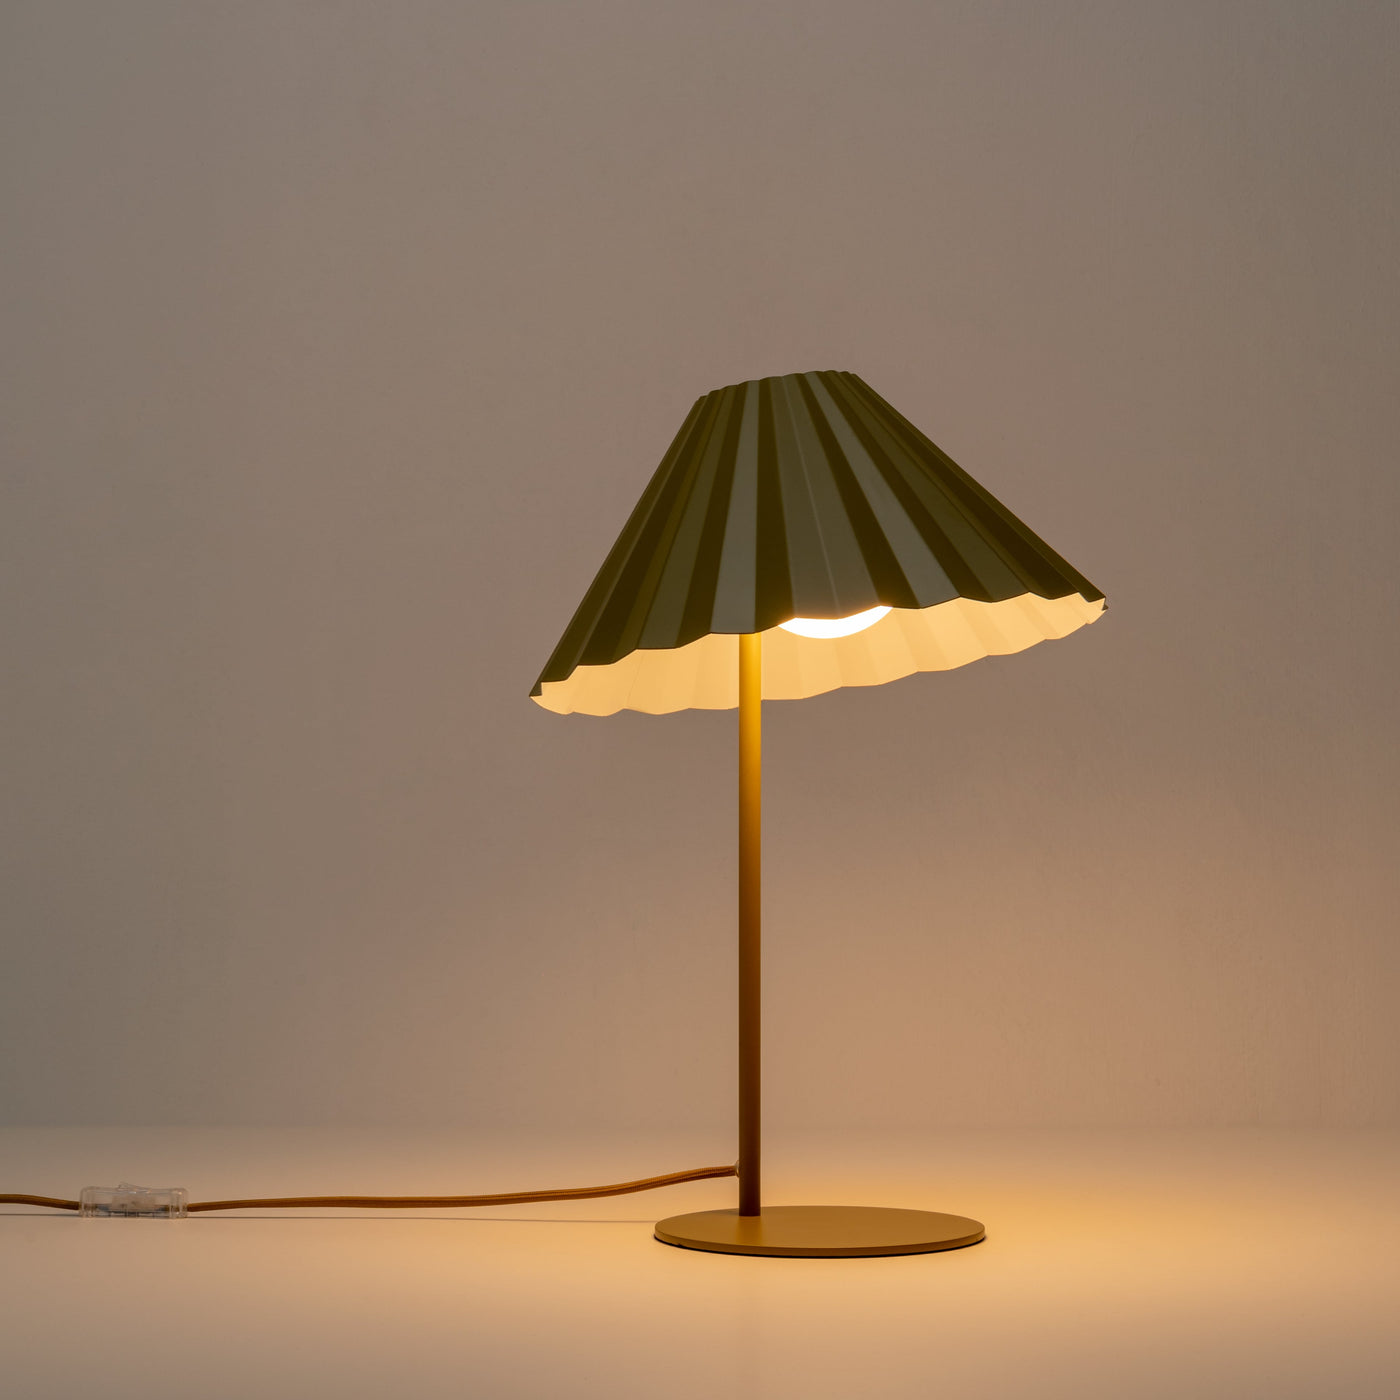 Houseof Pleat Table Lamp designed by Emma Gurner, light on. Available from someday designs.